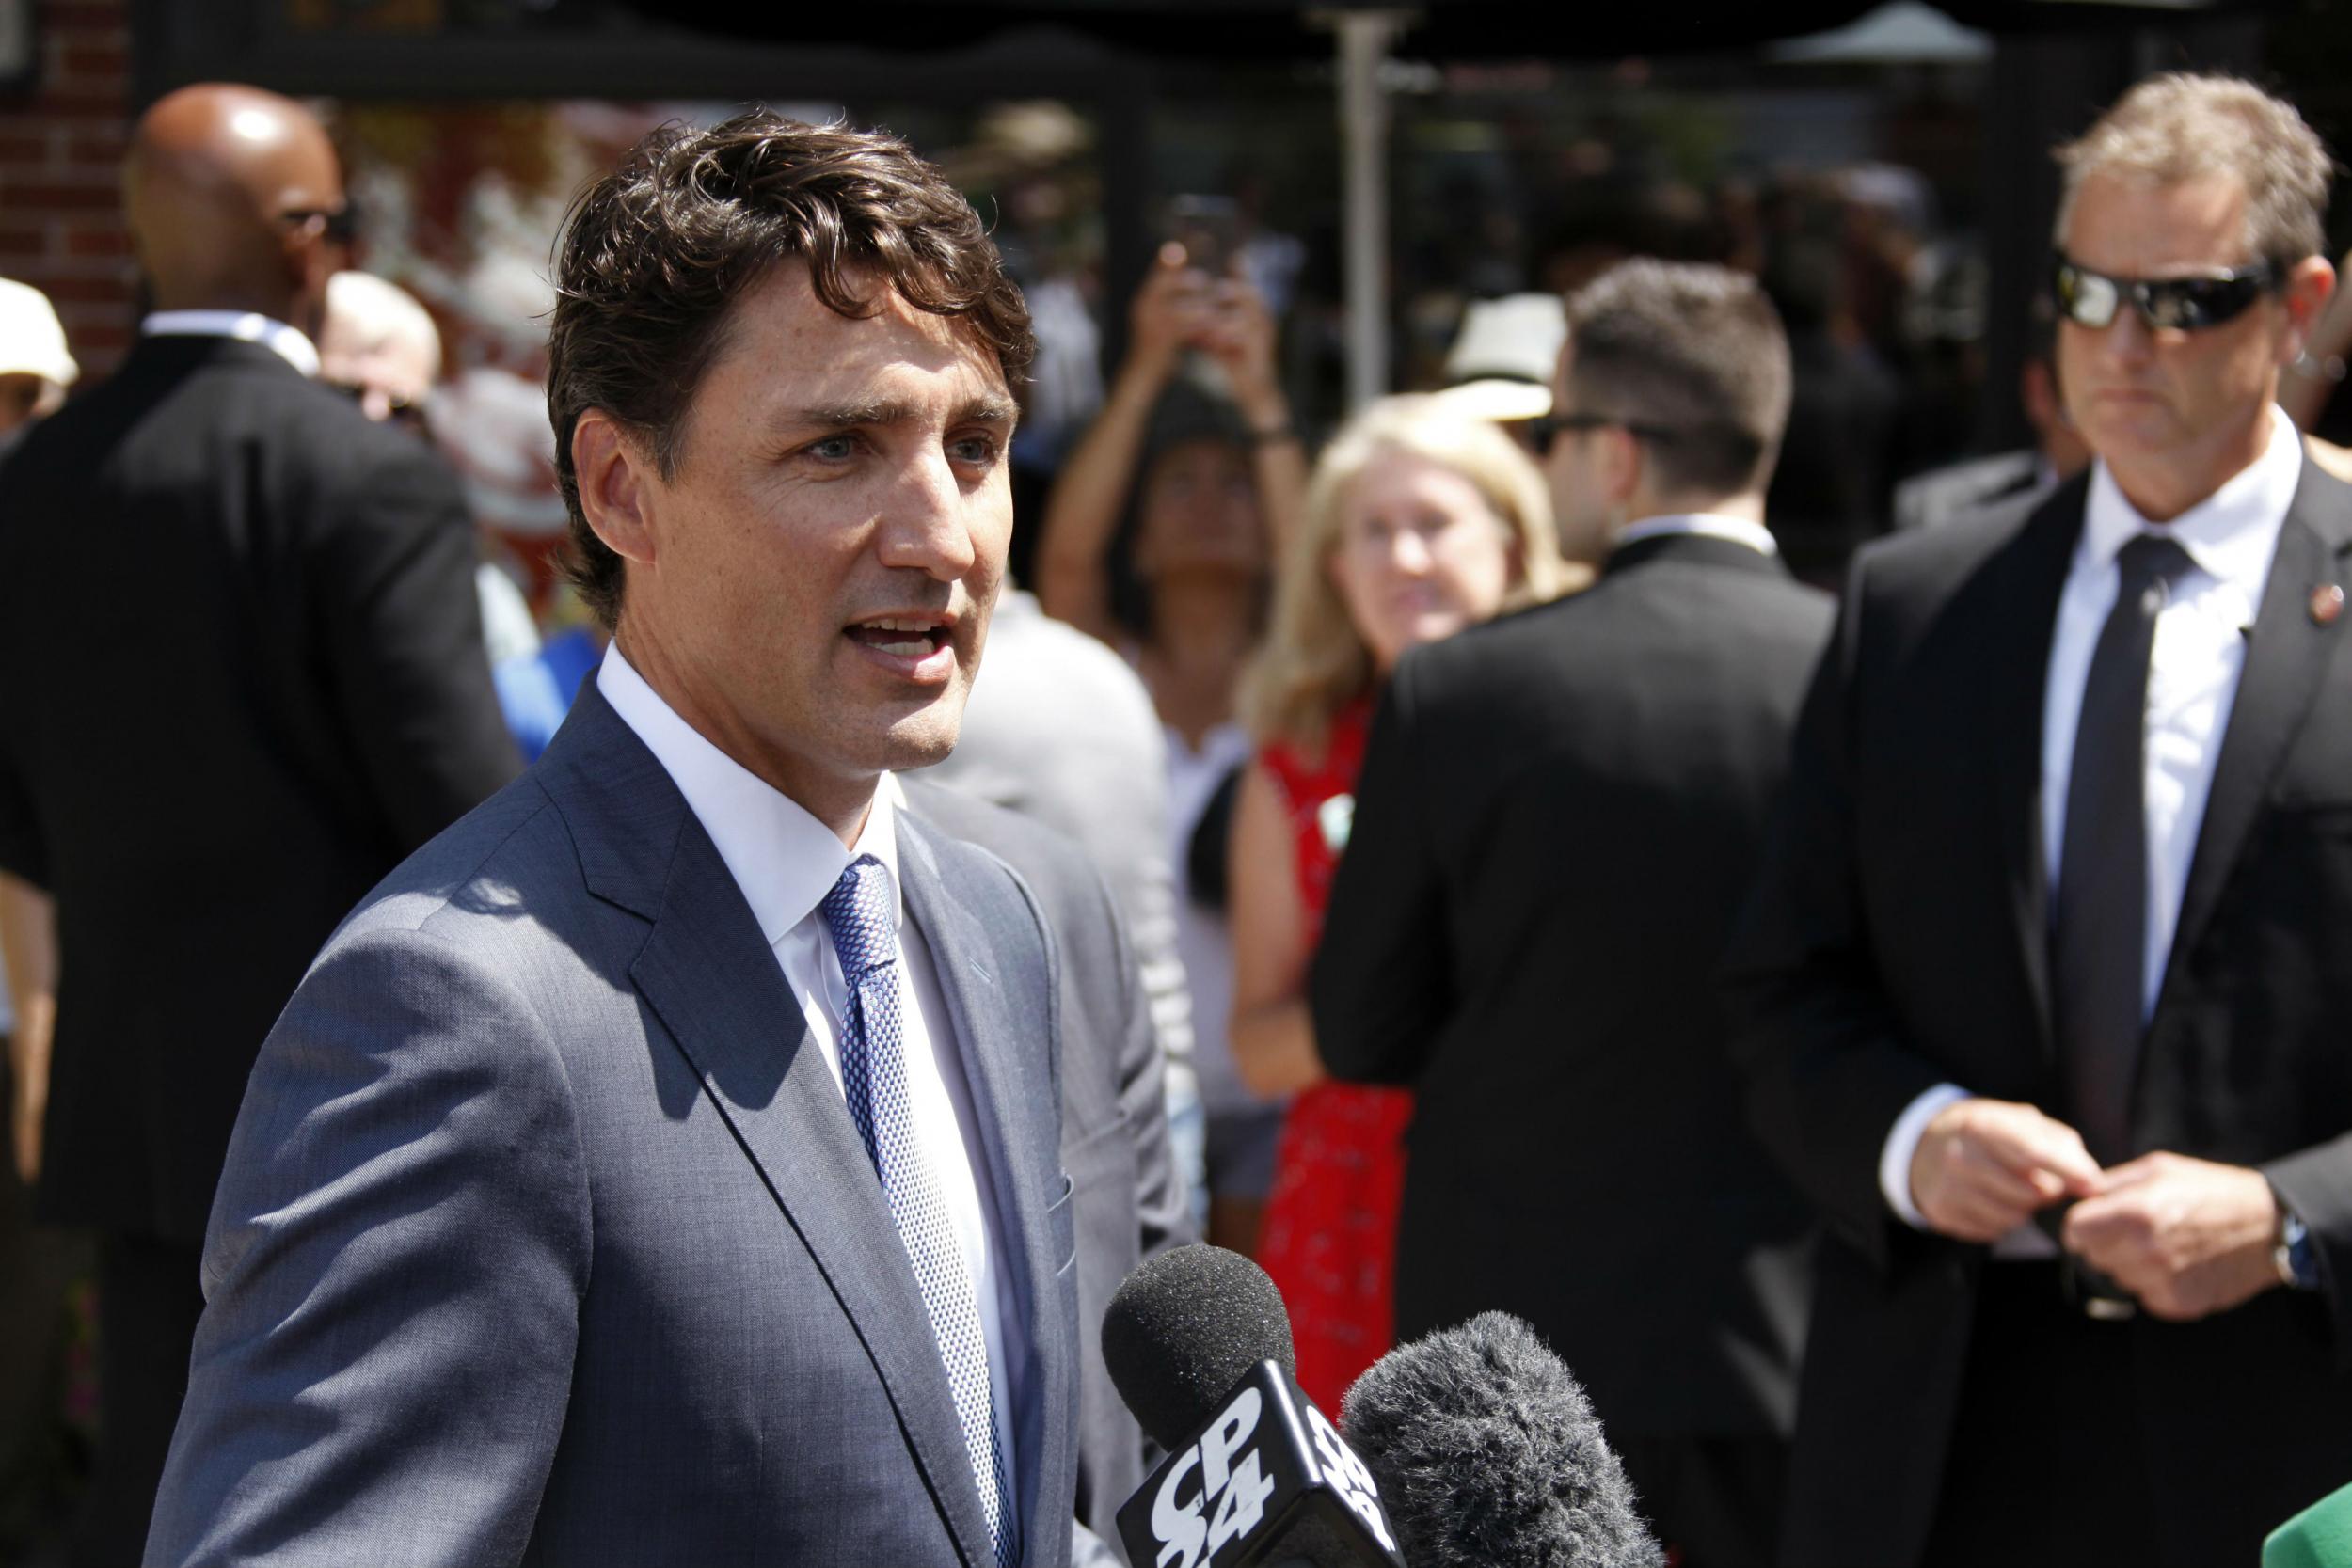 Justin Trudeau is to make Canada the first country to apologise for refusing to allow entry to the Jewish immigrants on board the St Louis